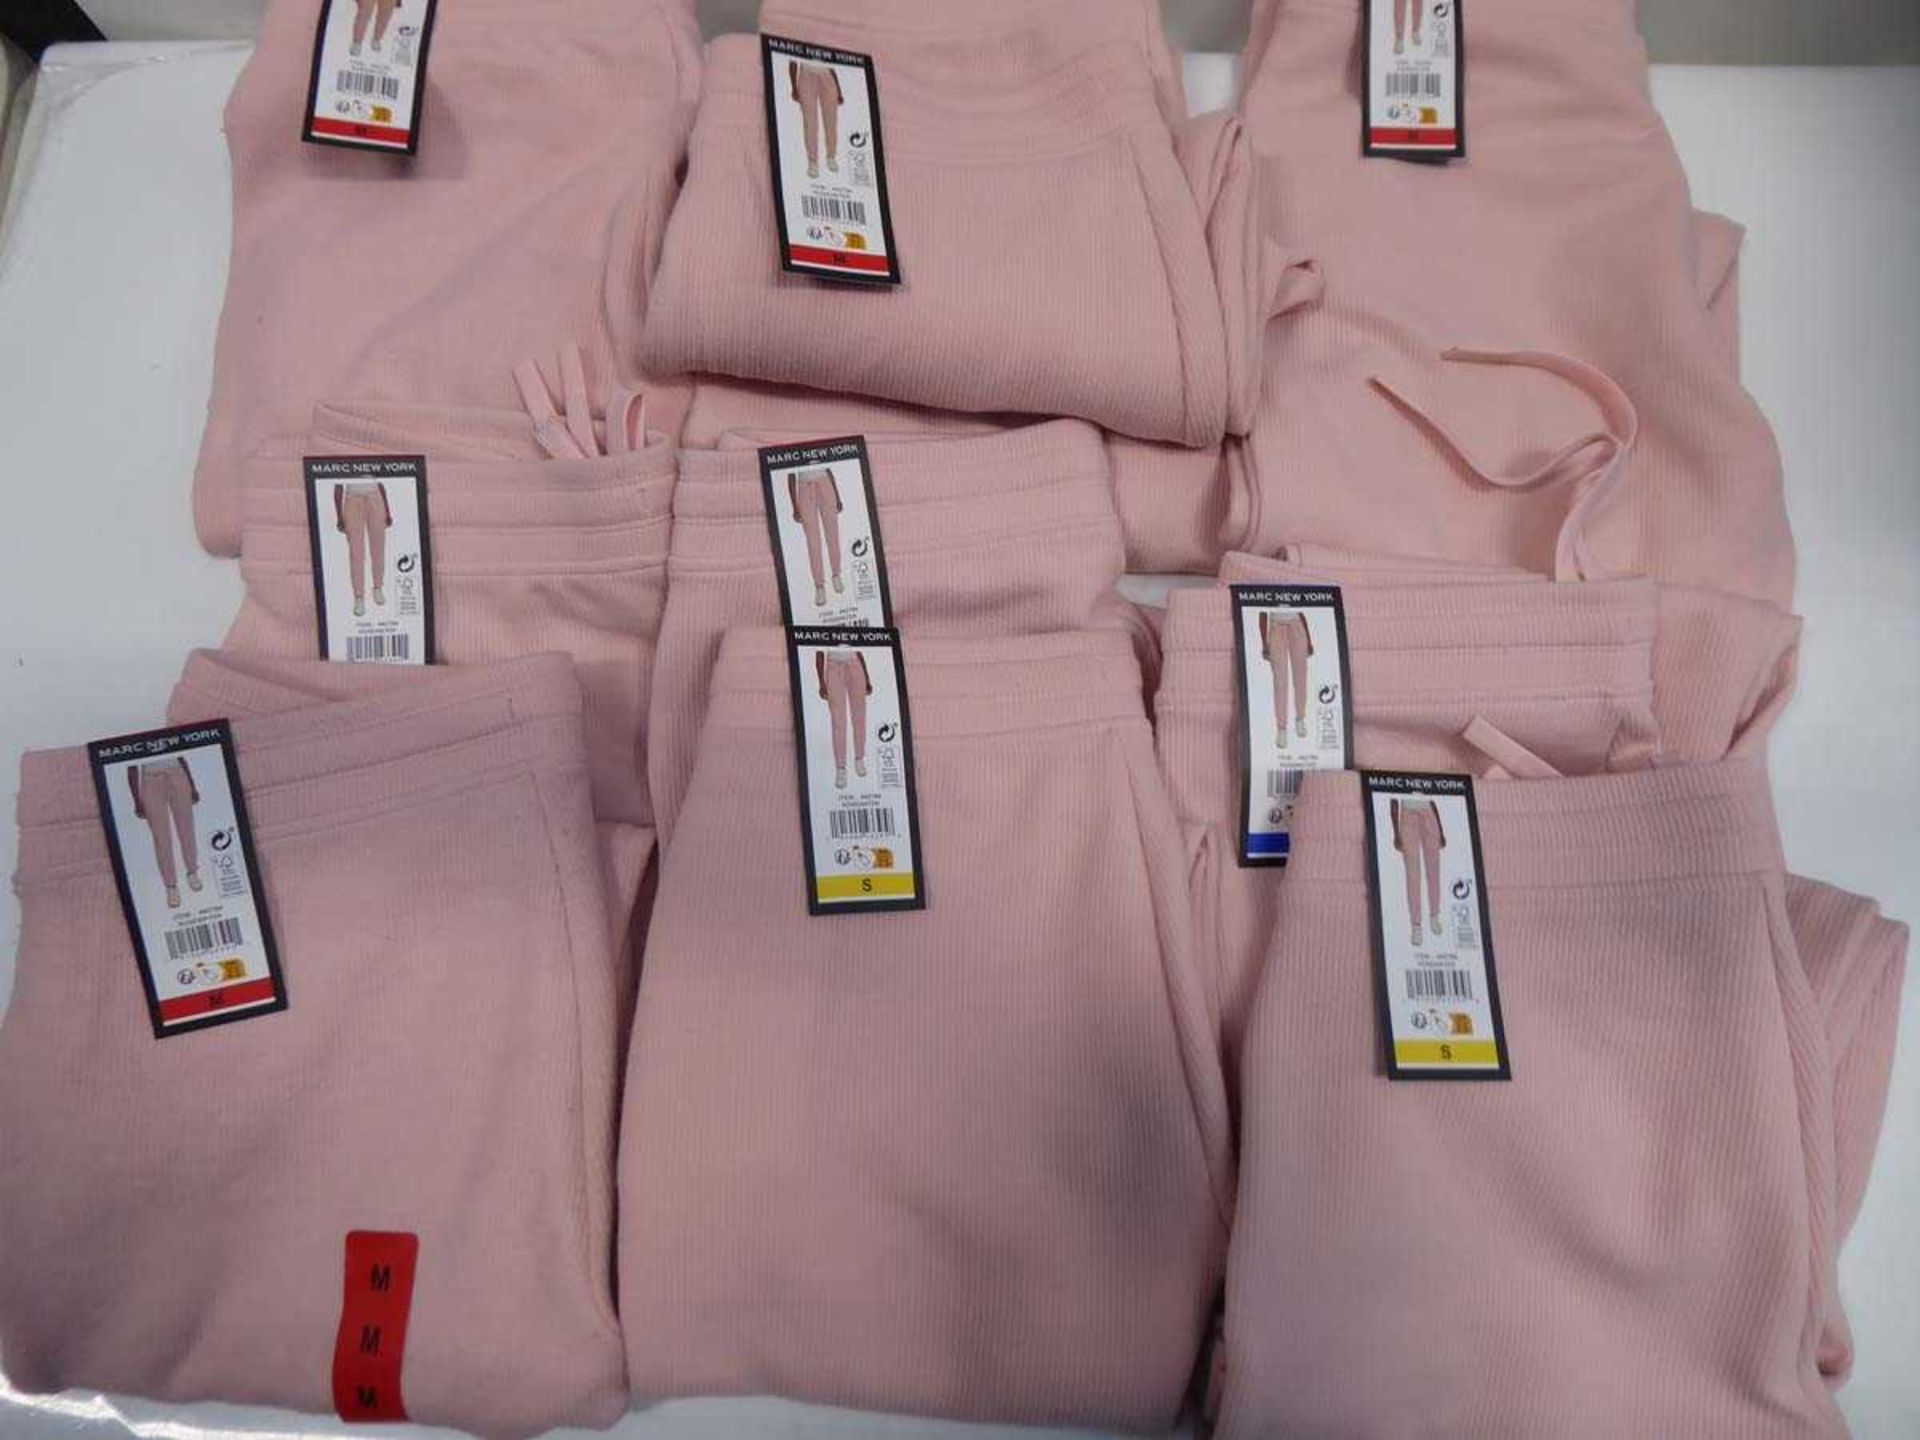 +VAT 10 pair of ladies Marc NY jogging bottoms in pink, mixed sizes